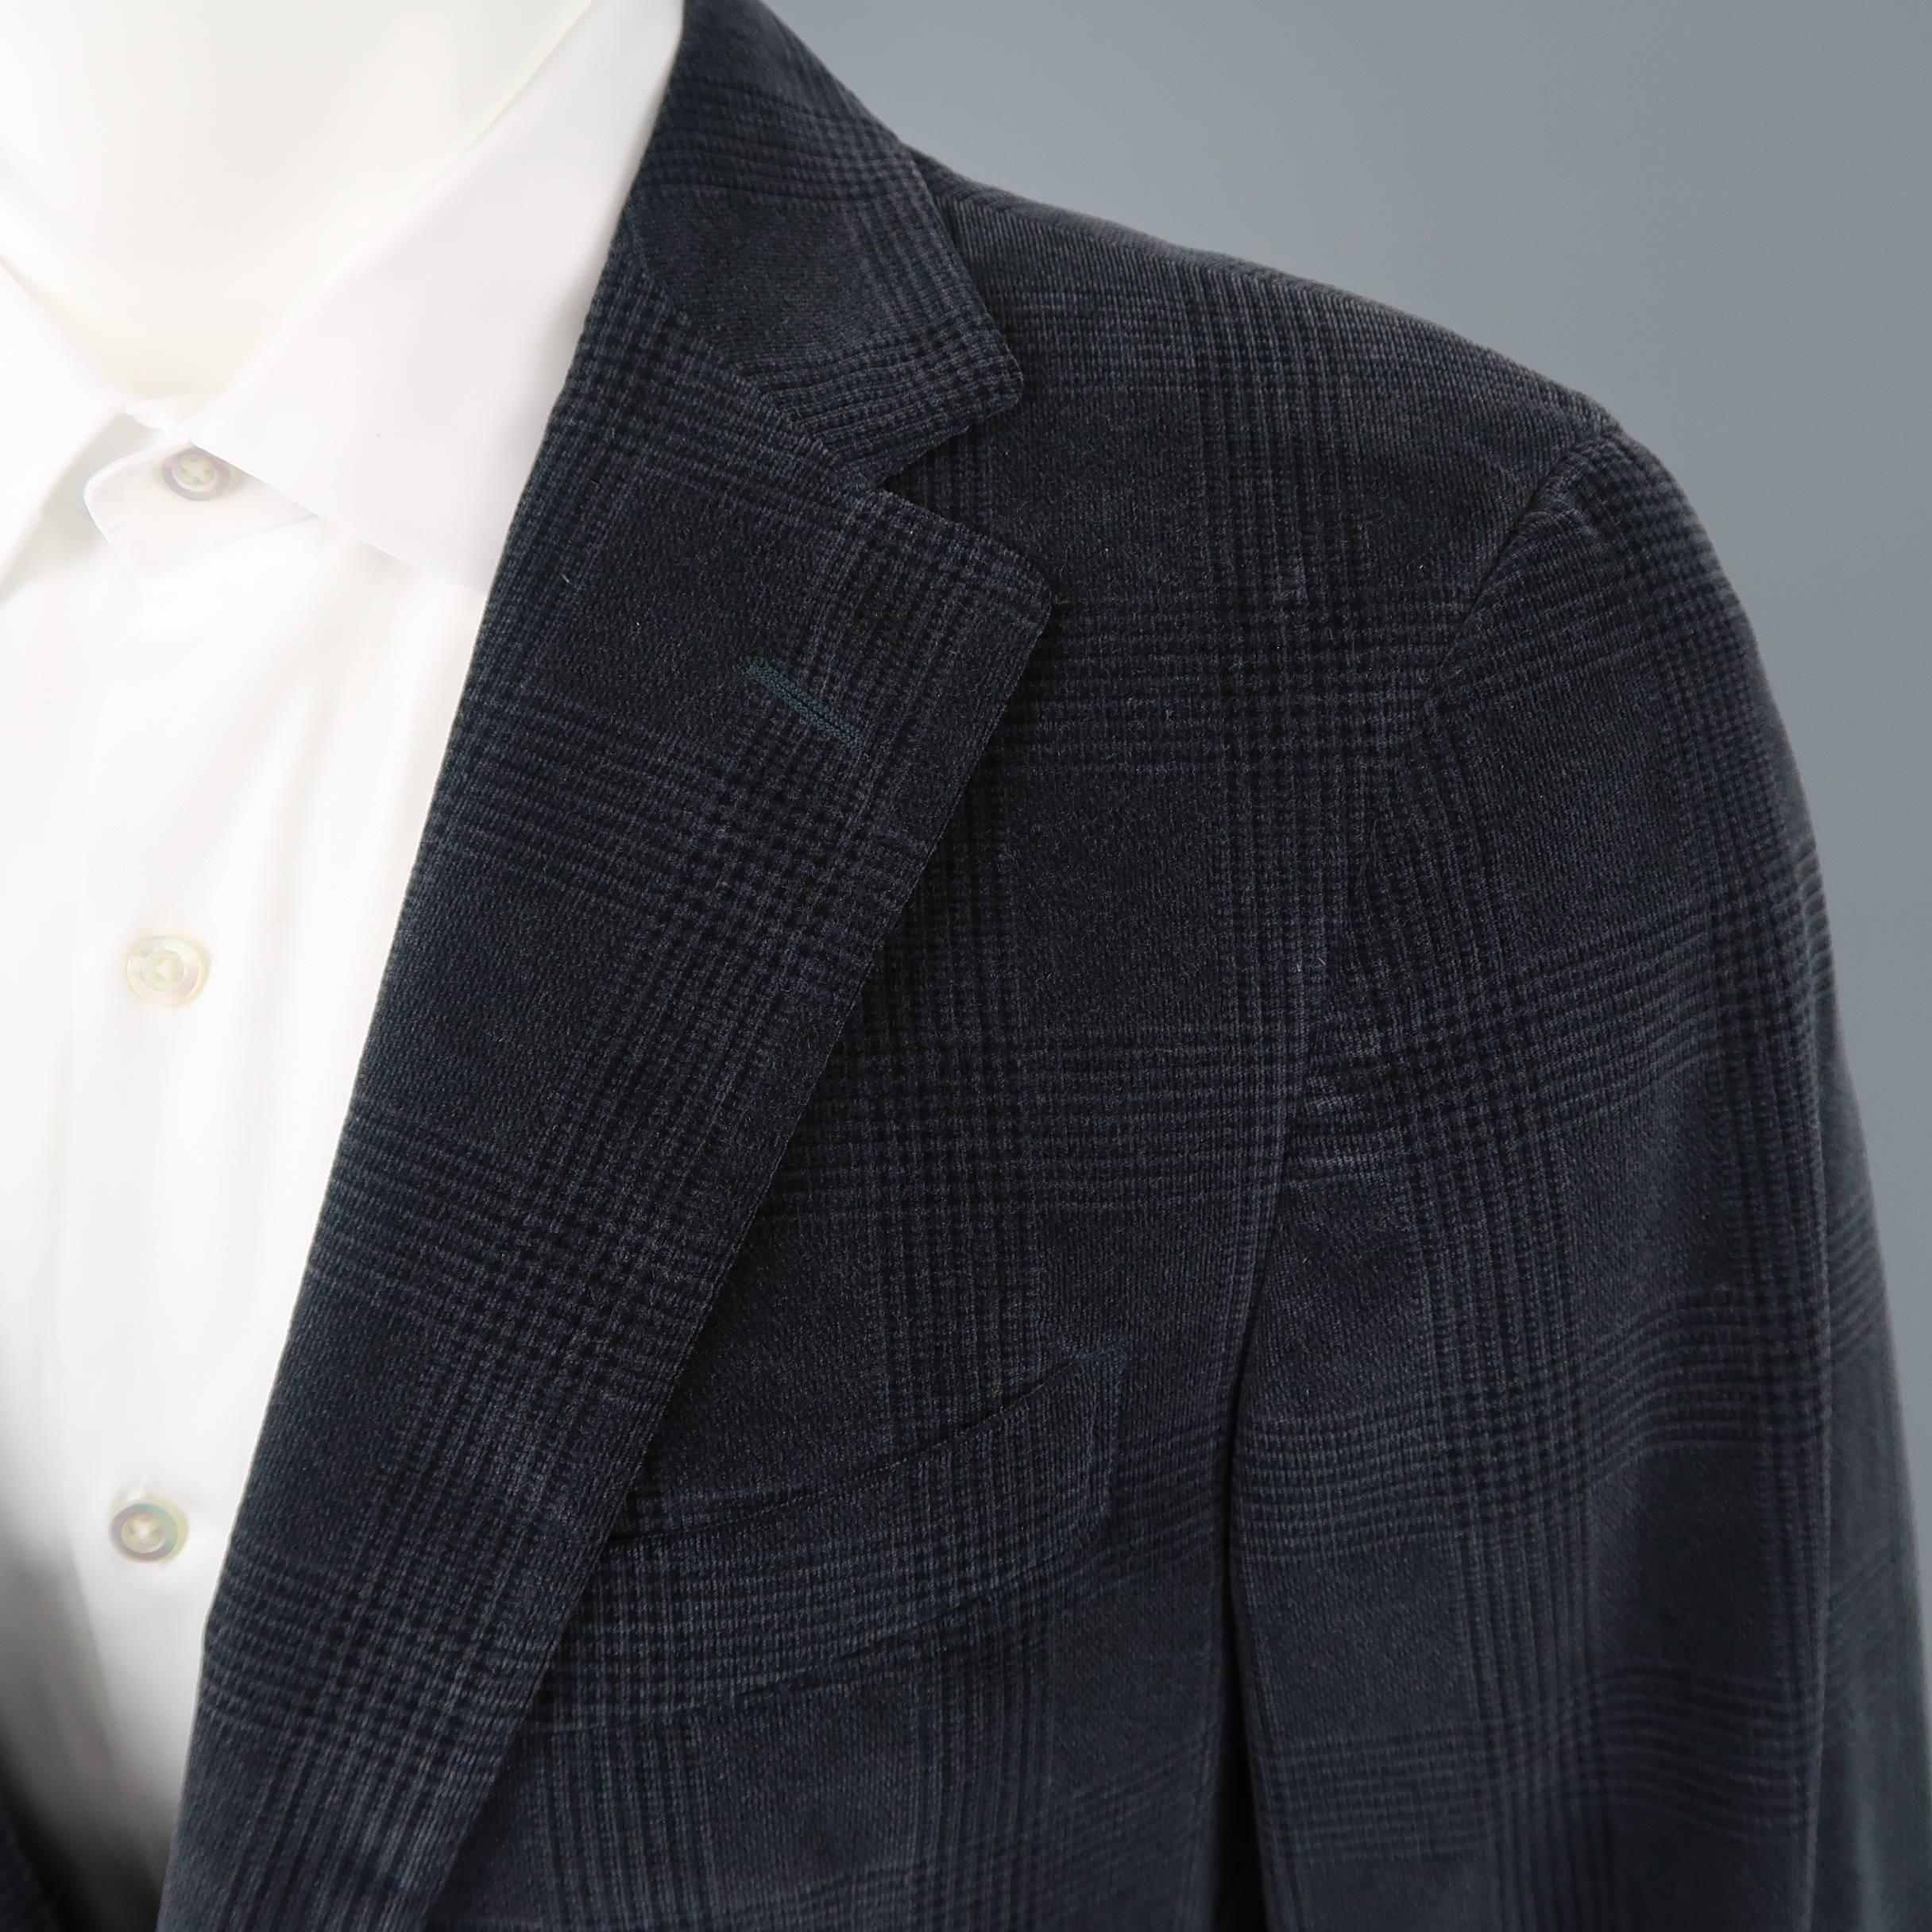 Single breasted ERMENEGILDO ZEGNA sport coat comes in a charcoal and black glenplaid print cotton cashmere blend velvet with a notch lapel, two button front, and double vented back. Made in Italy.
 
Good Pre-Owned Condition.
Marked: IT 48 R
